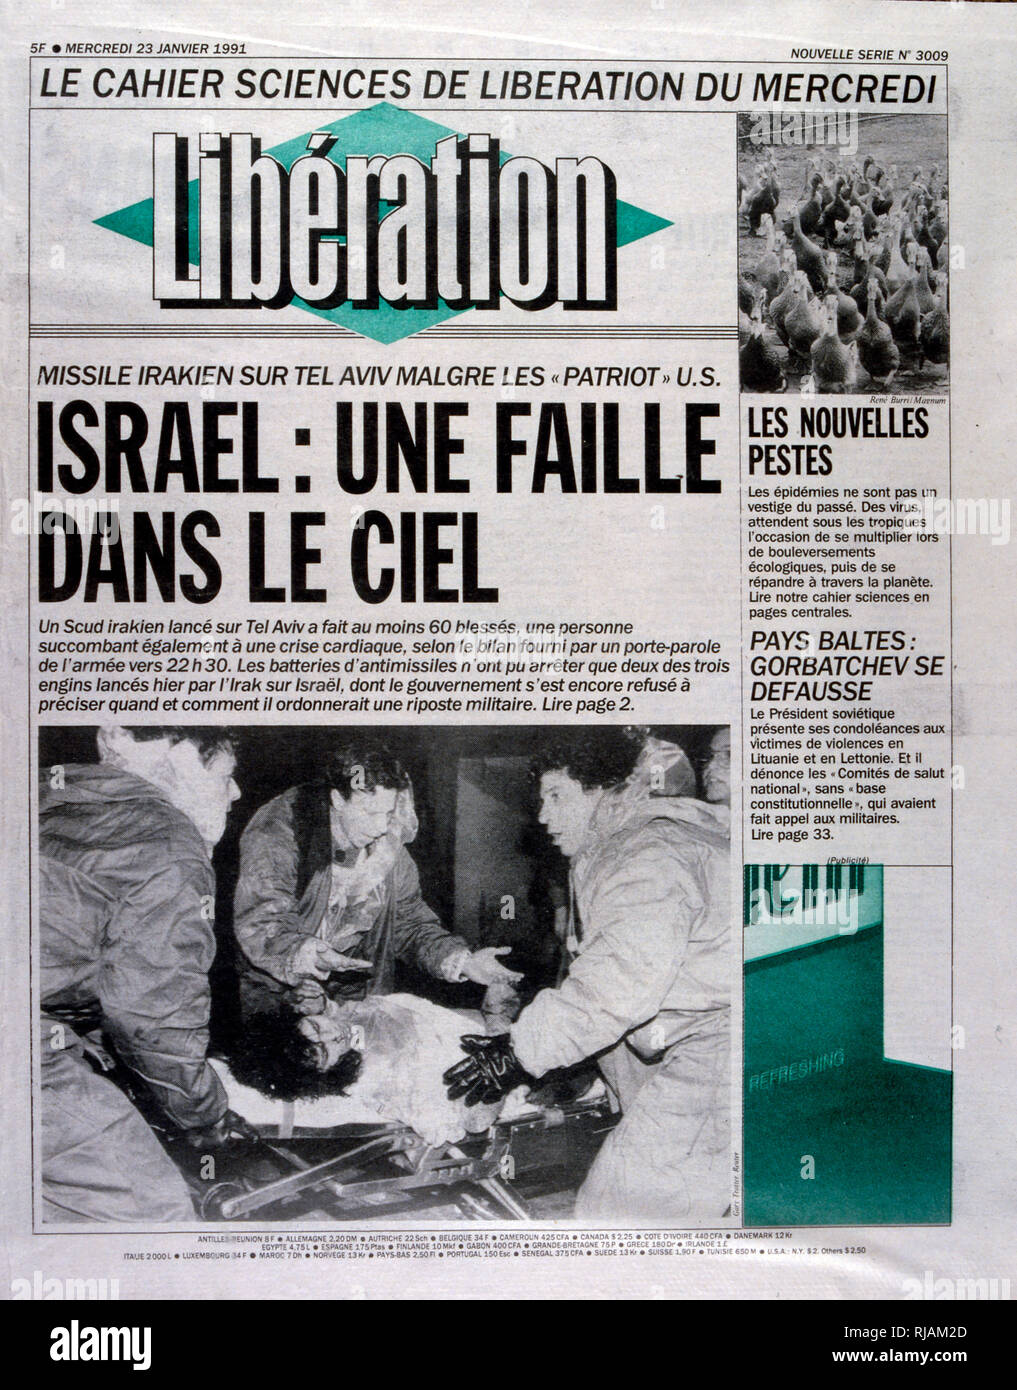 Headline in 'Liberation' a French newspaper, 23rd January 1991, concerning a missile attack on Israel during the Gulf War (2 August 1990 - 28 February 1991). codenamed Operation Desert Shield and Operation Desert Storm, the war waged by coalition forces from 35 nations led by the United States against Iraq in response to Iraq's invasion and annexation of Kuwait. the pictures show French filed commanders and the French War cabinet under President Mitterrand. Stock Photo